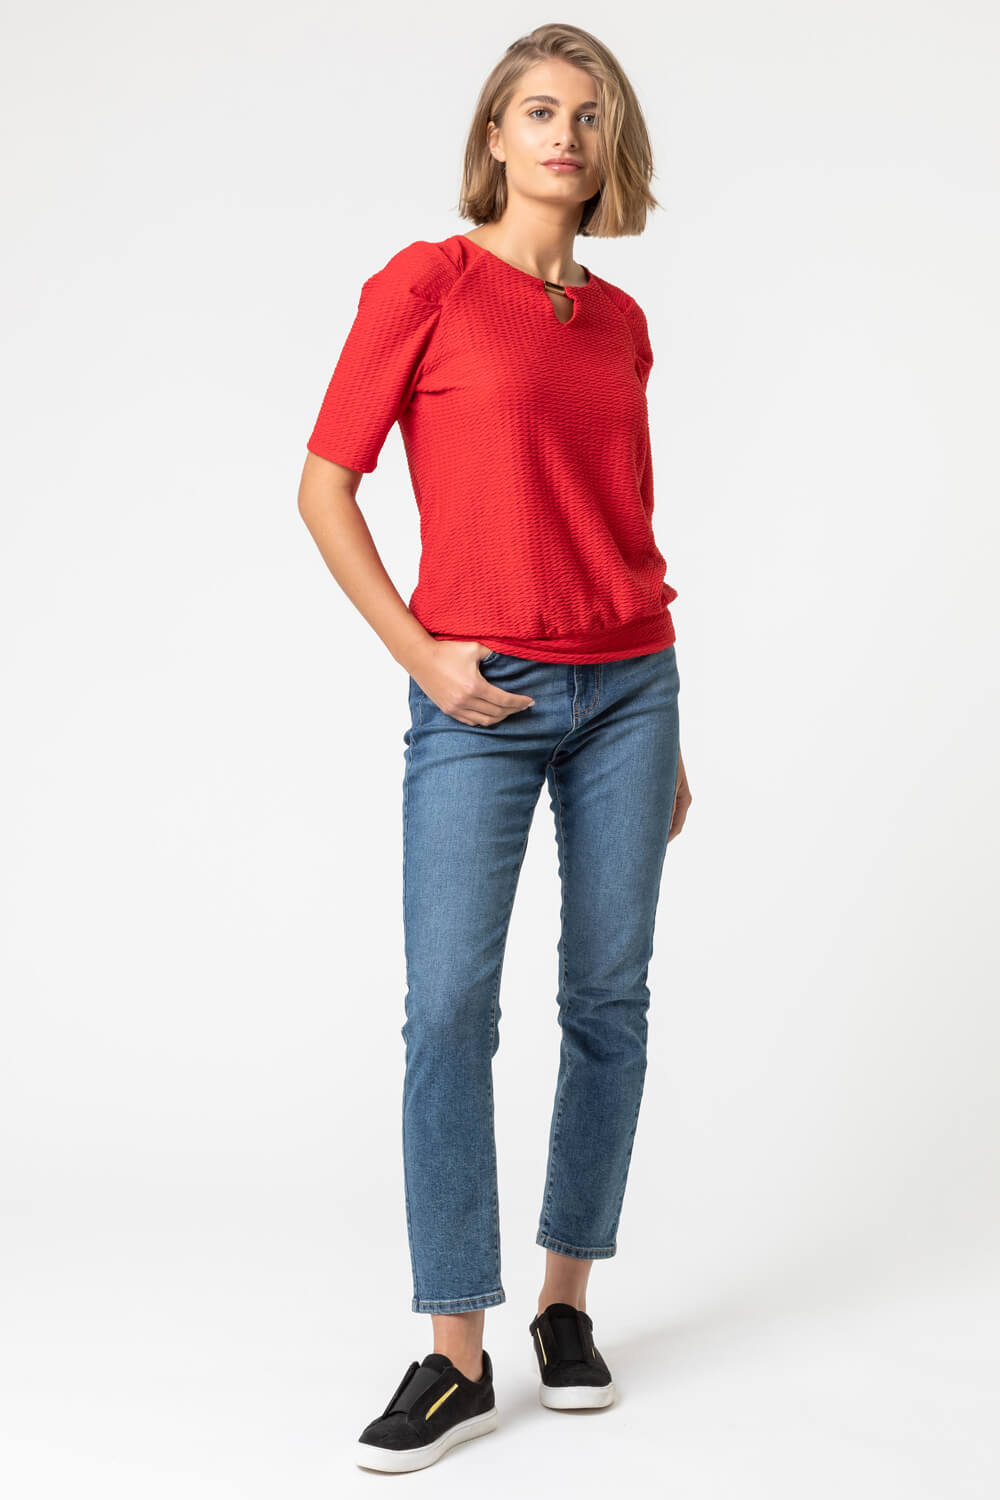 Red Keyhole Neck Textured Top, Image 3 of 4